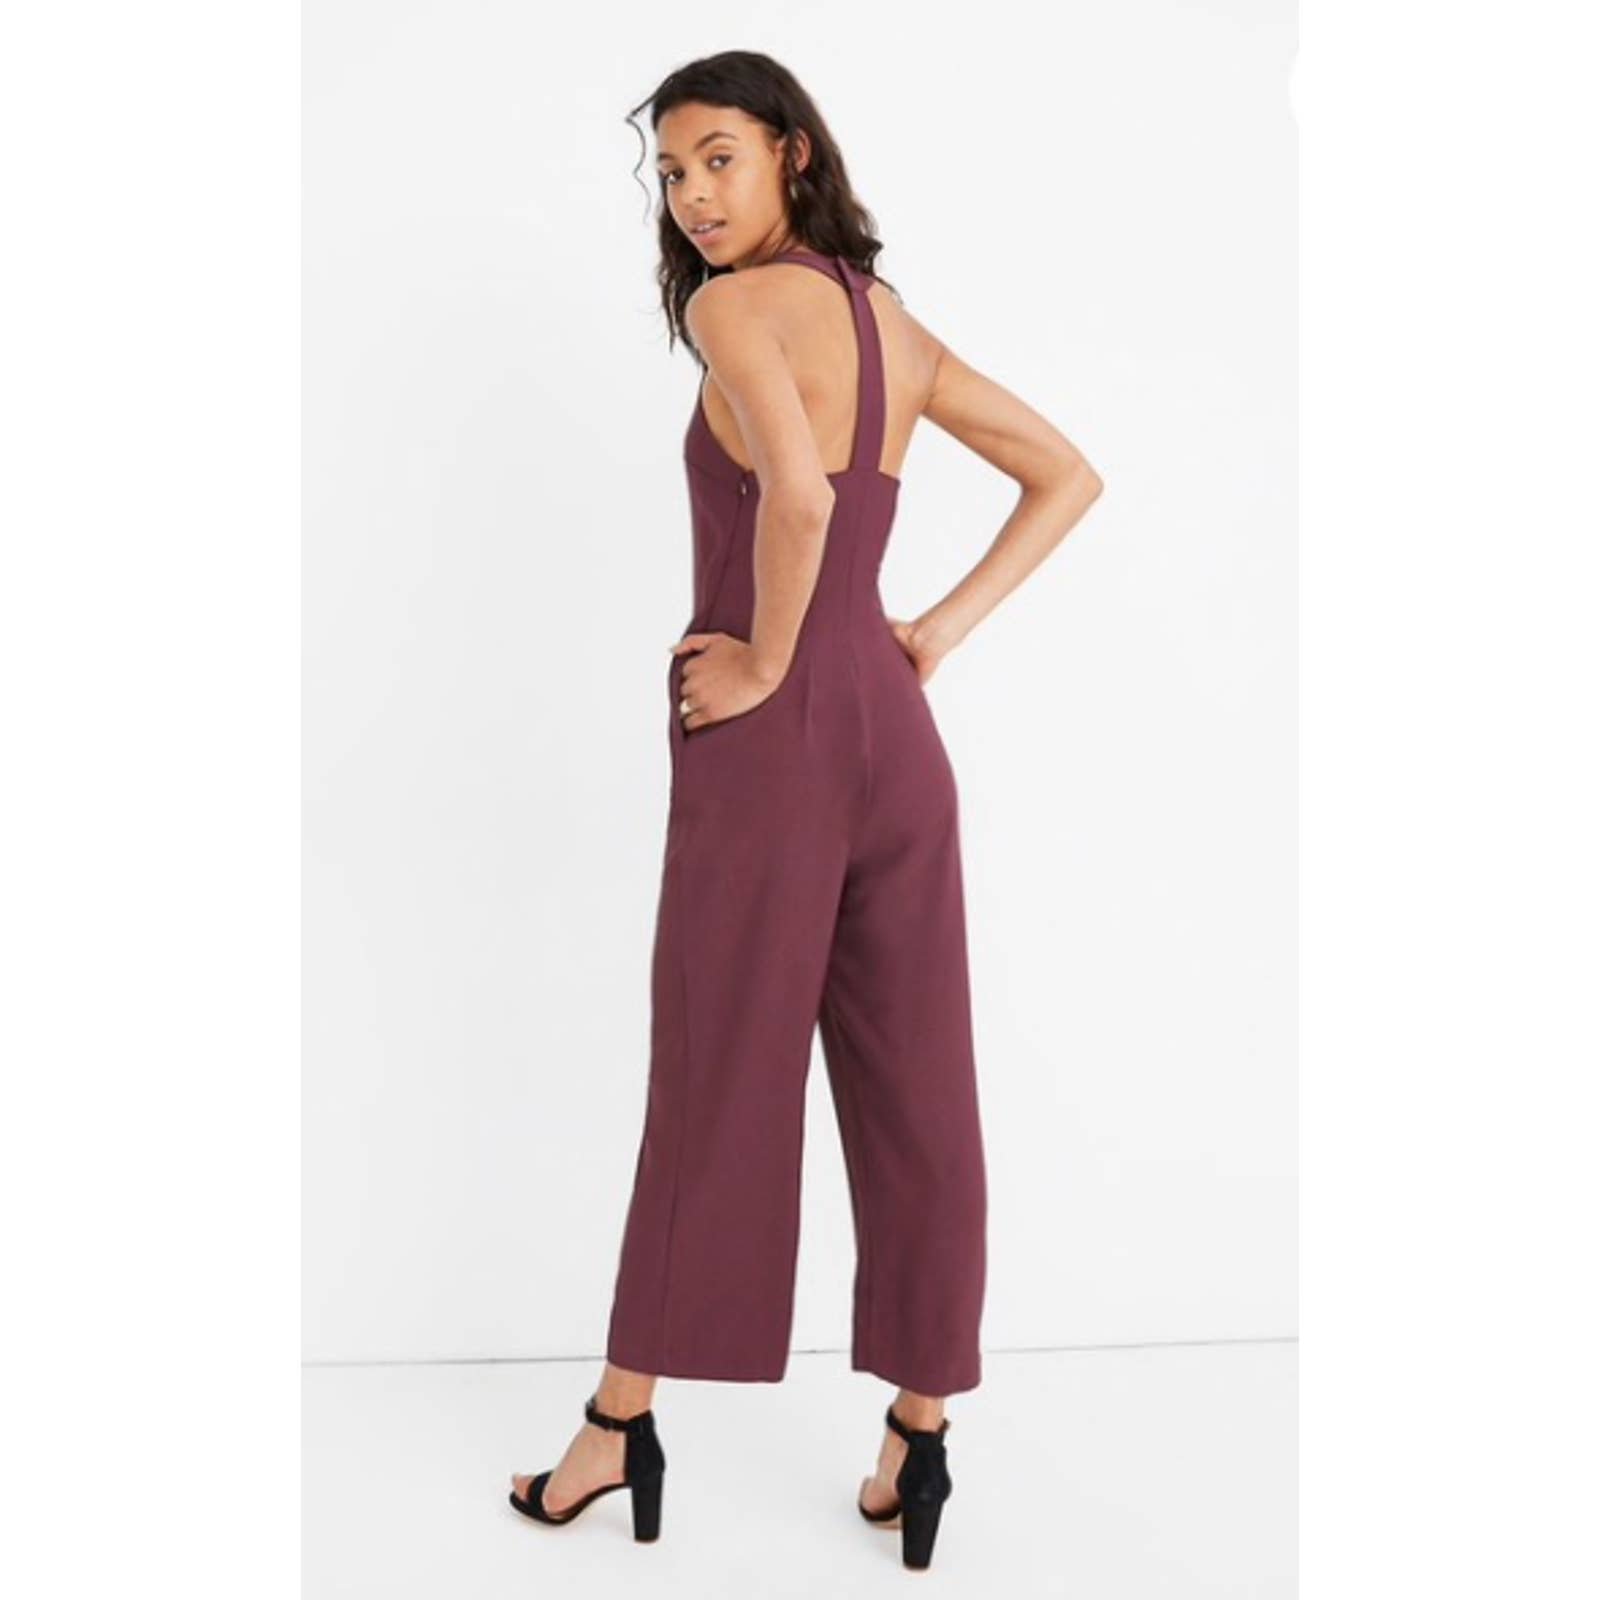 Comfortable Madewell T-Back Crepe Jumpsuit 2 Purple Open BackWide Straight Leg Fit nmRlqhxQU Factory Price